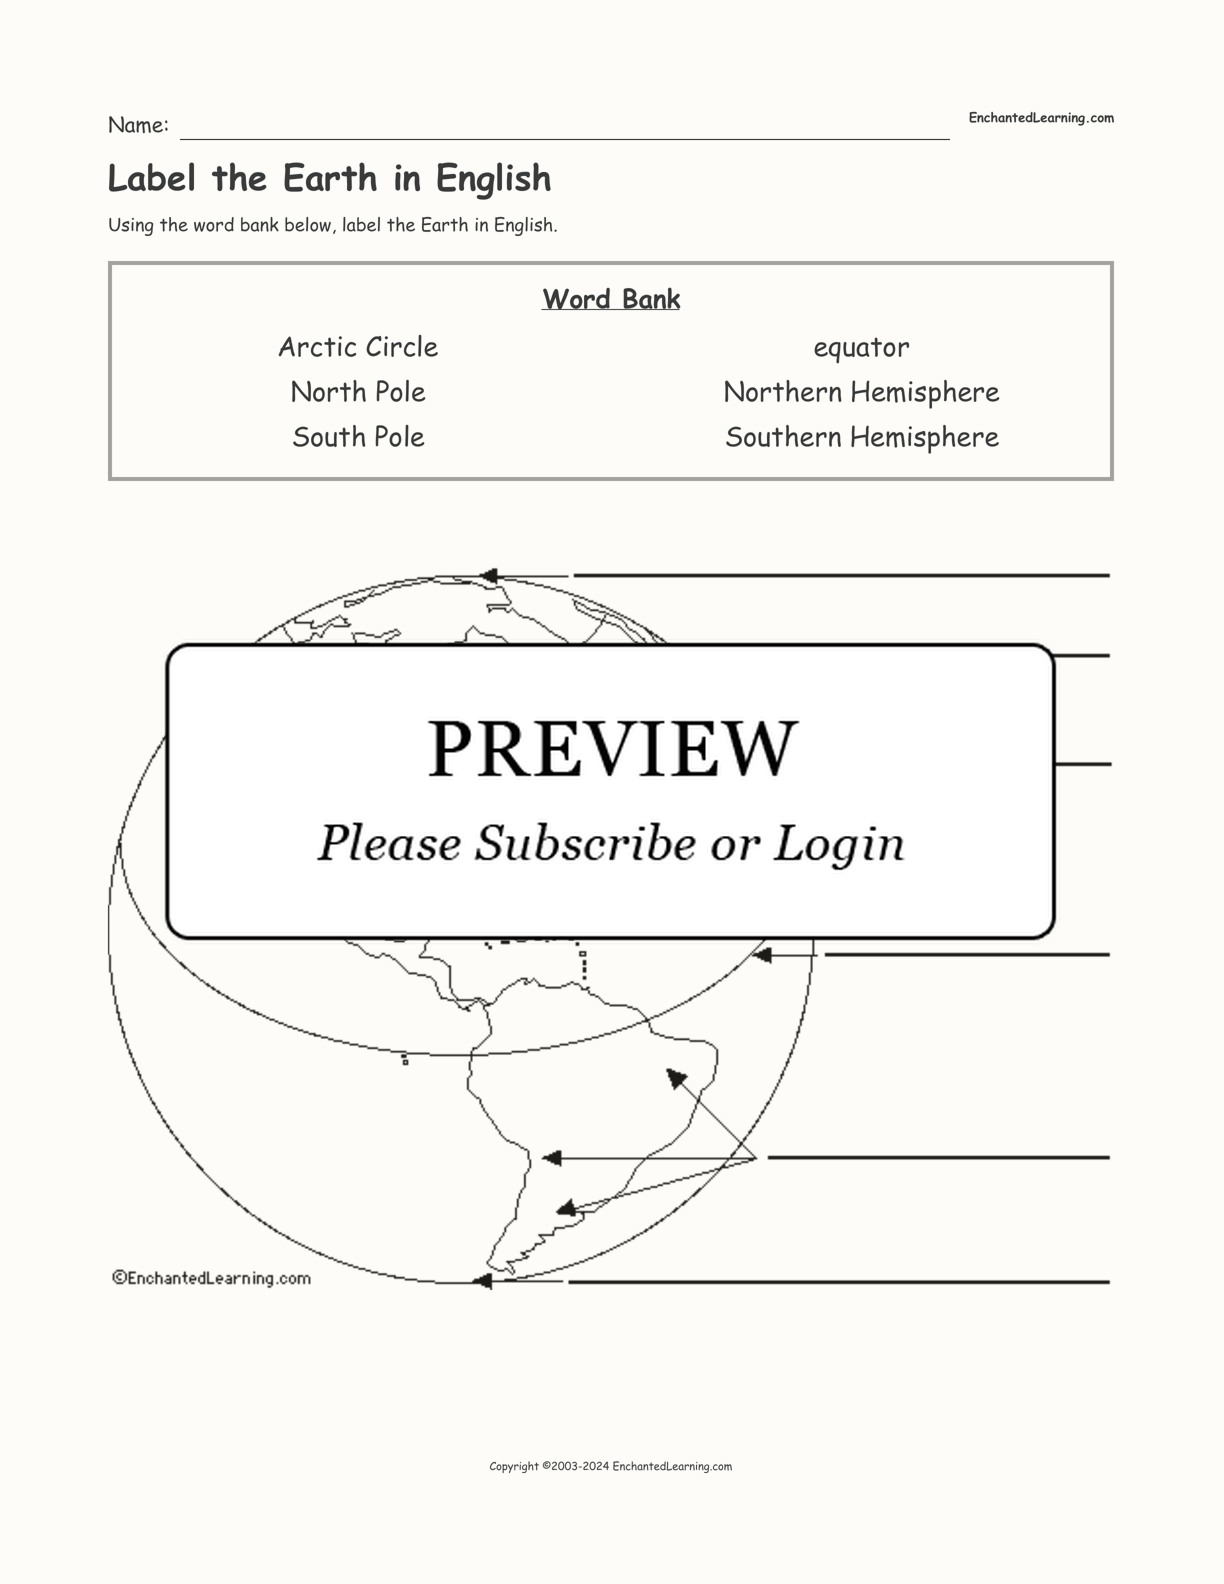 Label the Earth in English interactive worksheet page 1